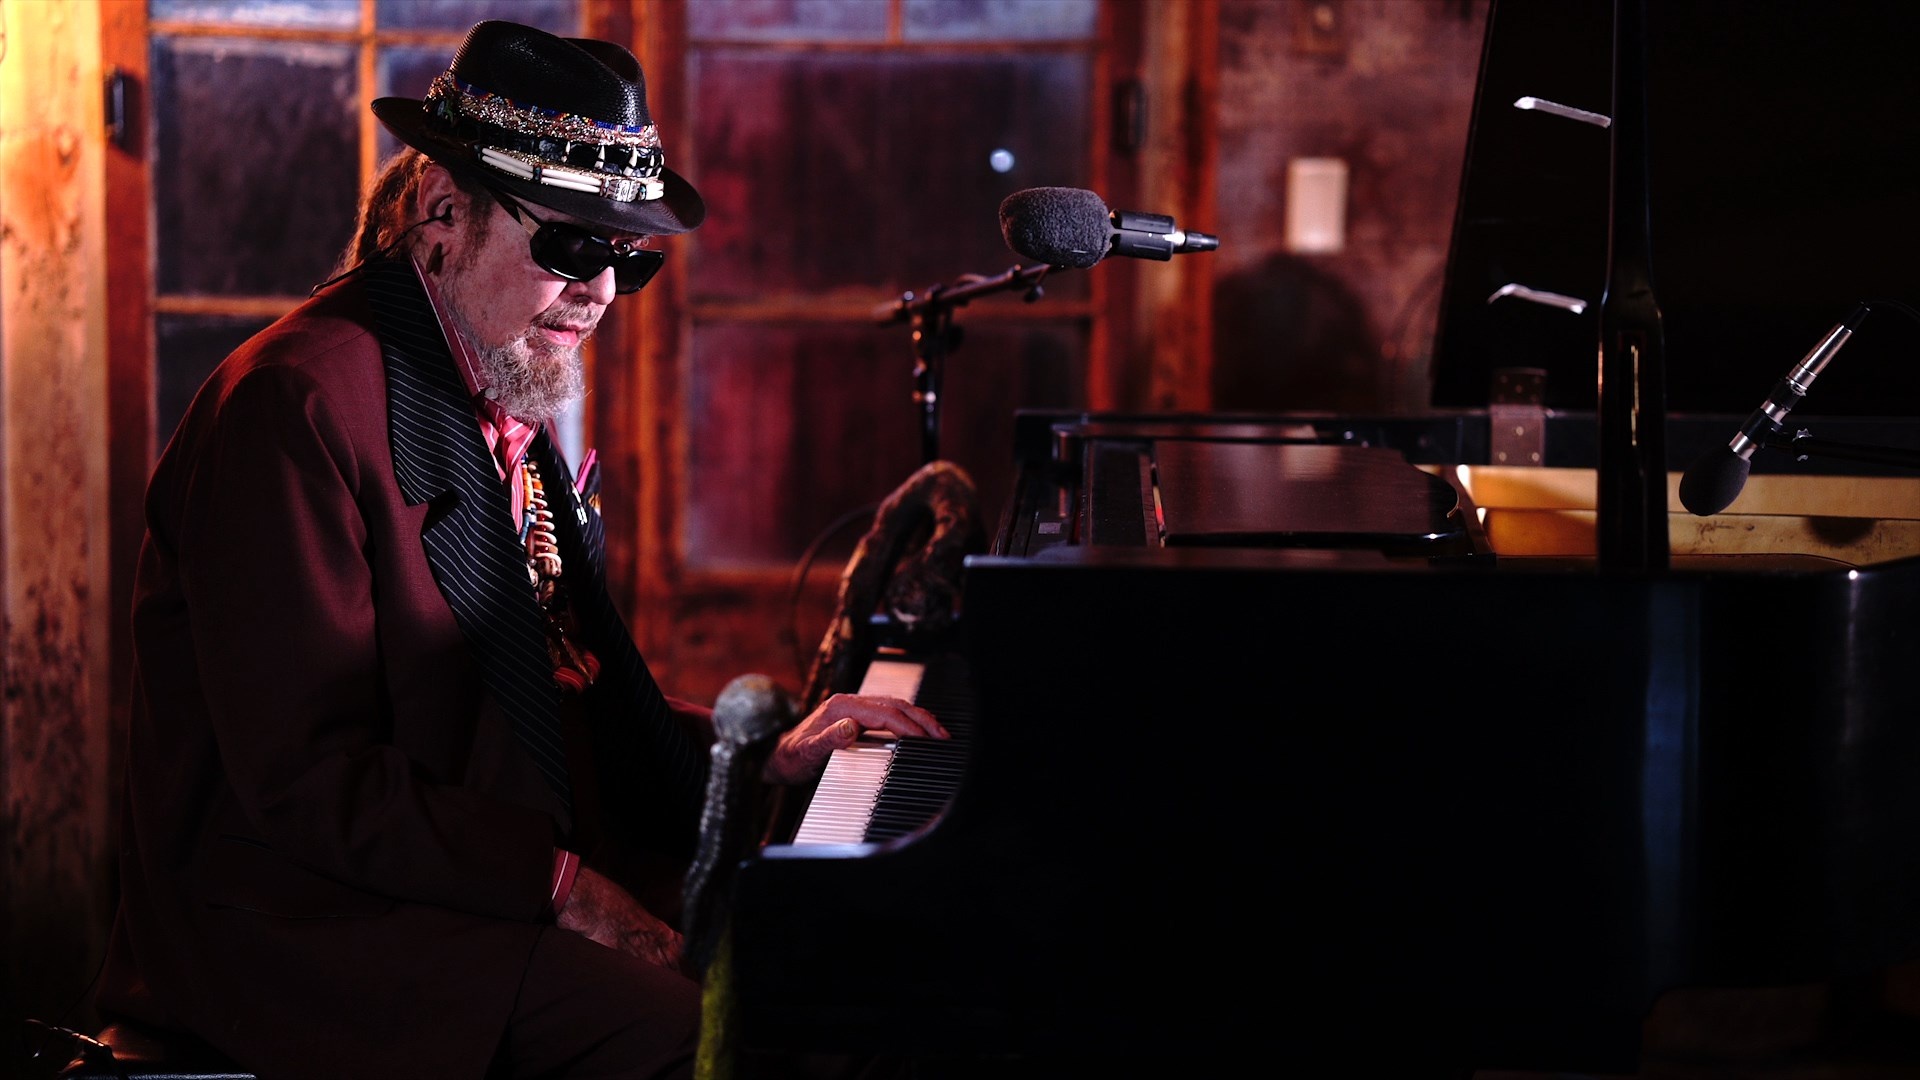 Dr. John, Playing for Change, Everlasting arms, Exclusive premiere, 1920x1080 Full HD Desktop